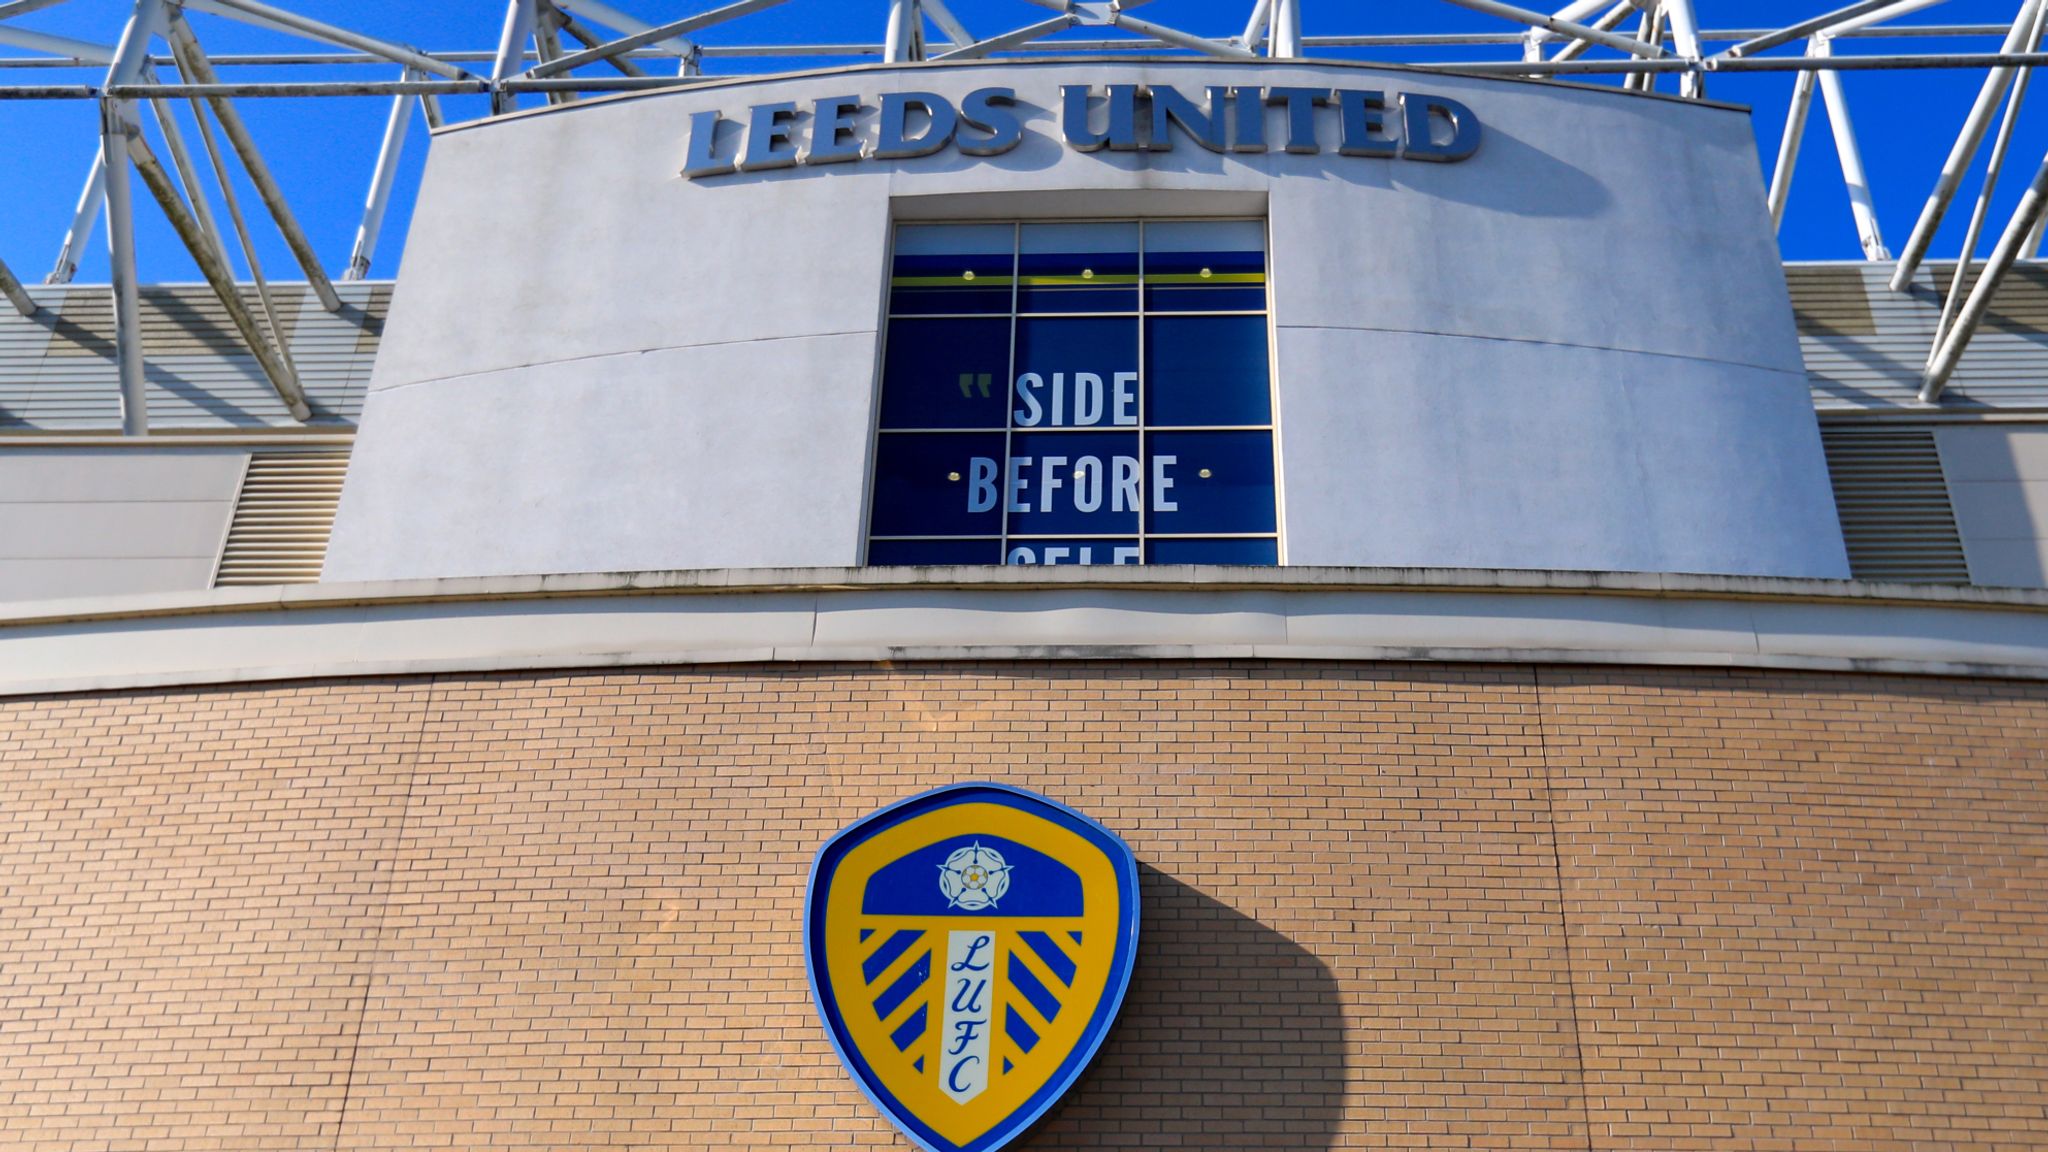 49ers very keen to keep hold of ace with best goal conversion rate at Leeds United CaughtOffside